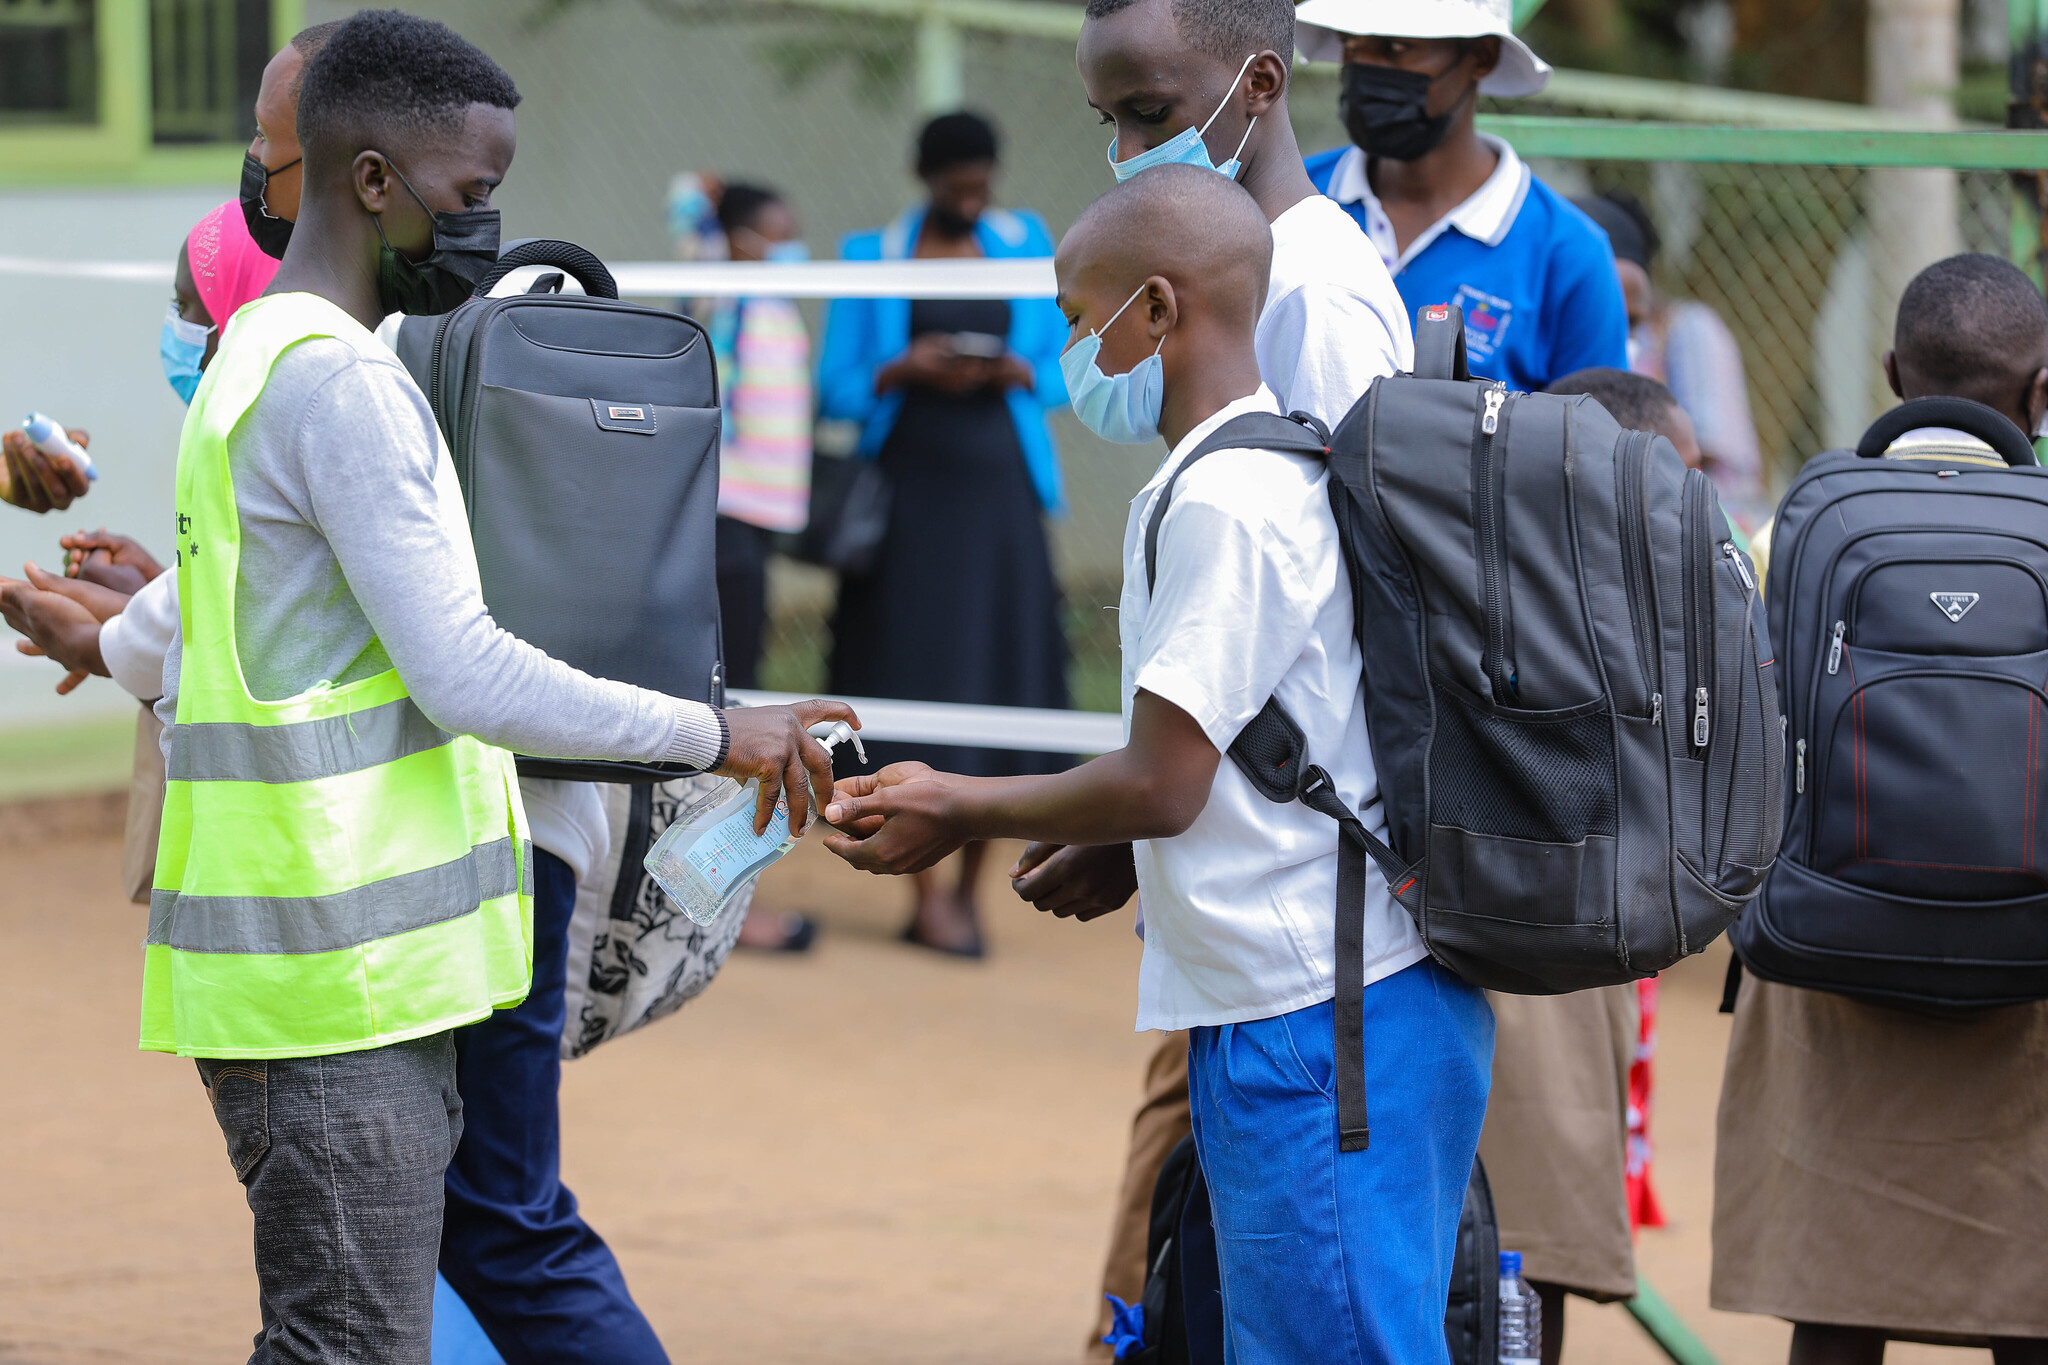 Students arrive at Kigali stadium to board buses on their way back to school for the second term on January 9,2022. Dan Nsengiyumva